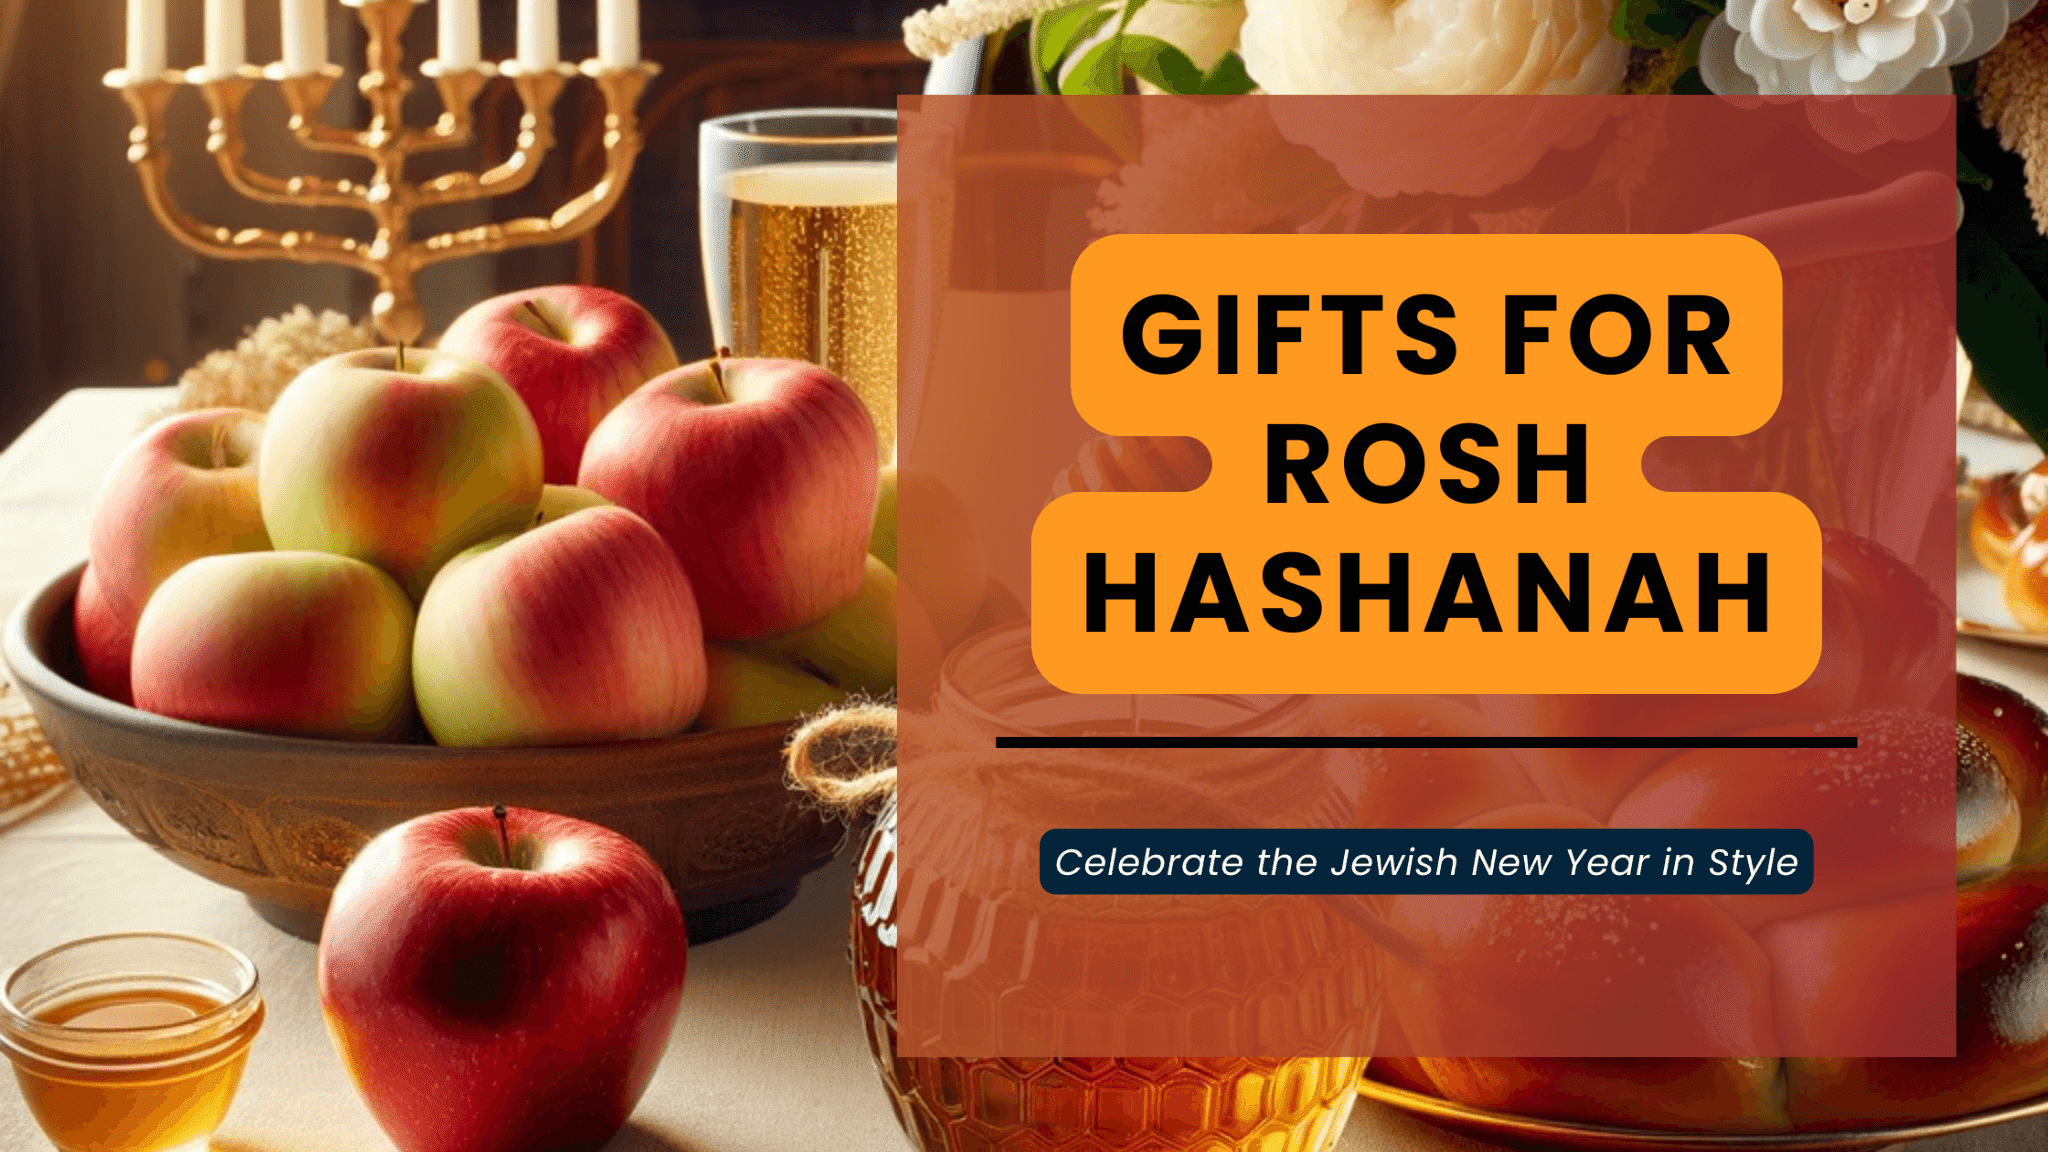 Gifts for Rosh Hashanah: Celebrate the Jewish New Year in Style